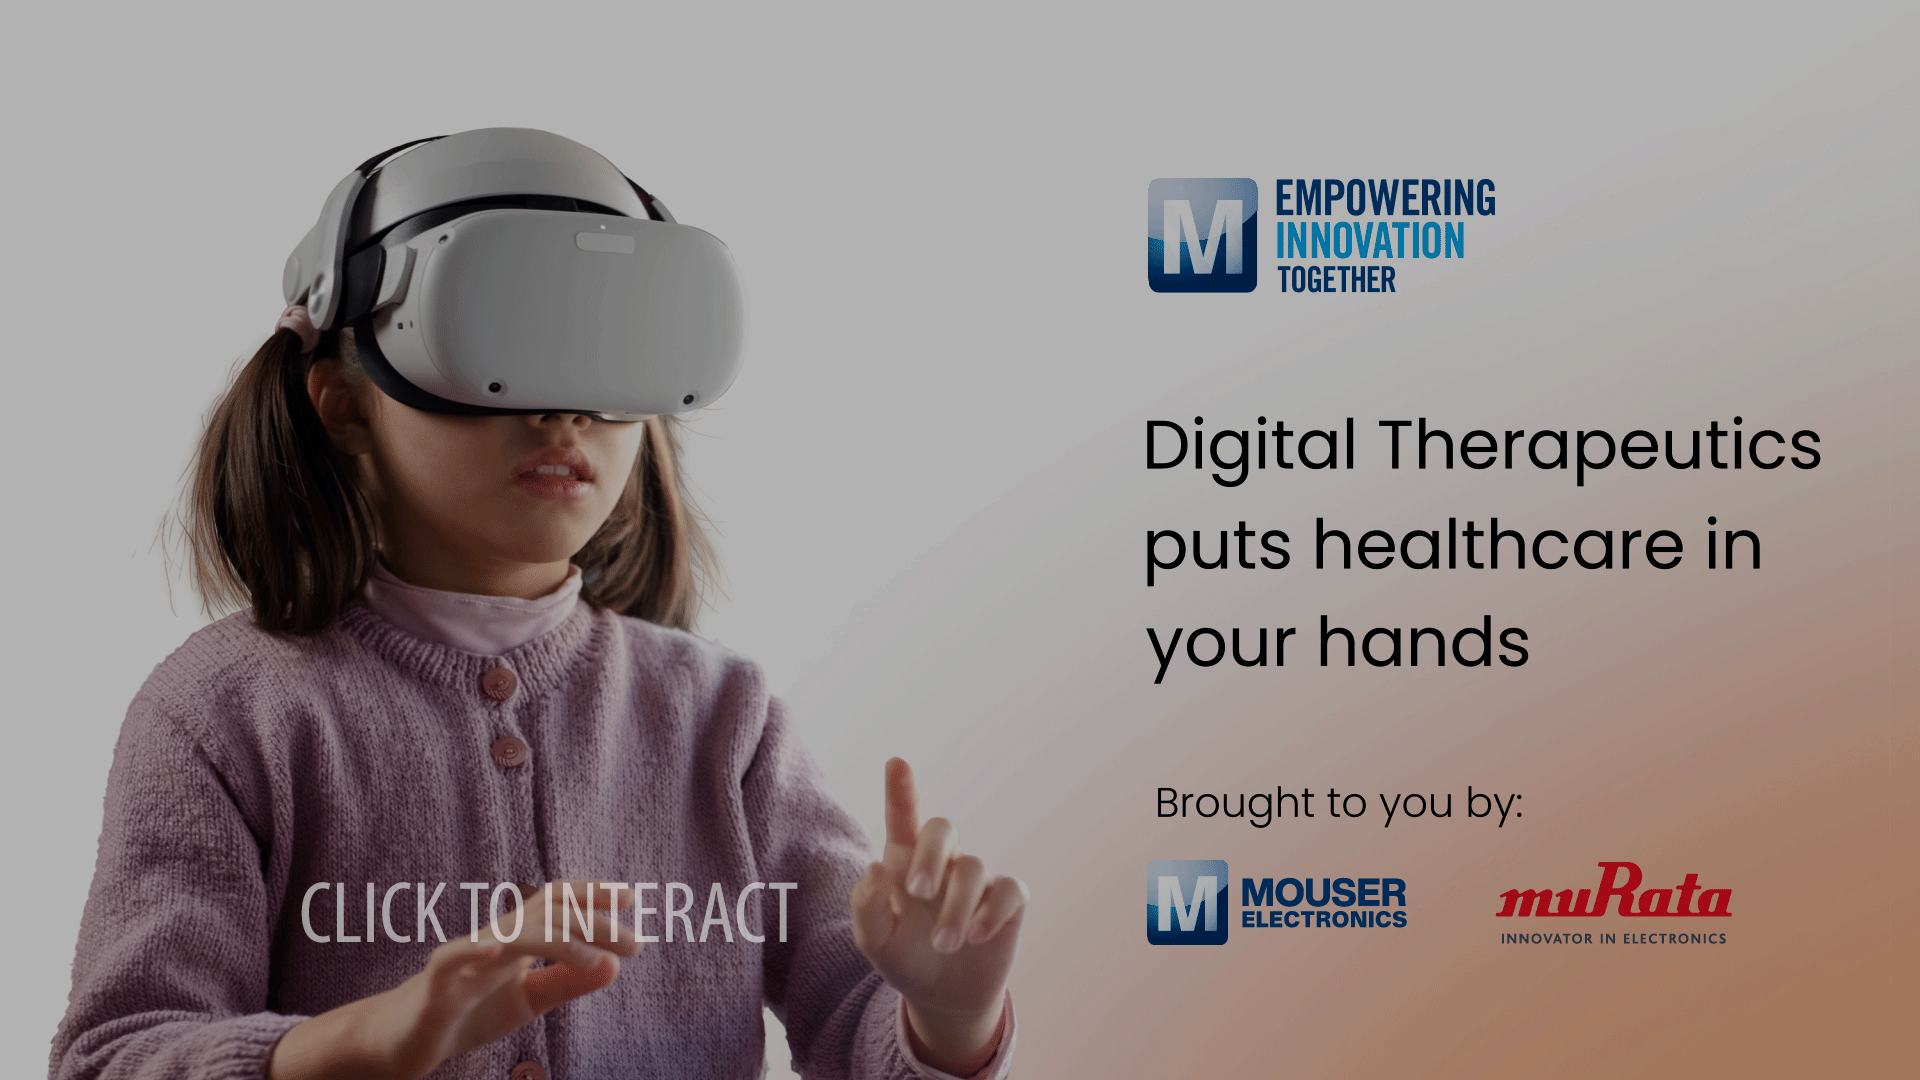 Mouser Electronics Shares the Revolutionary Power of Digital Therapeutics